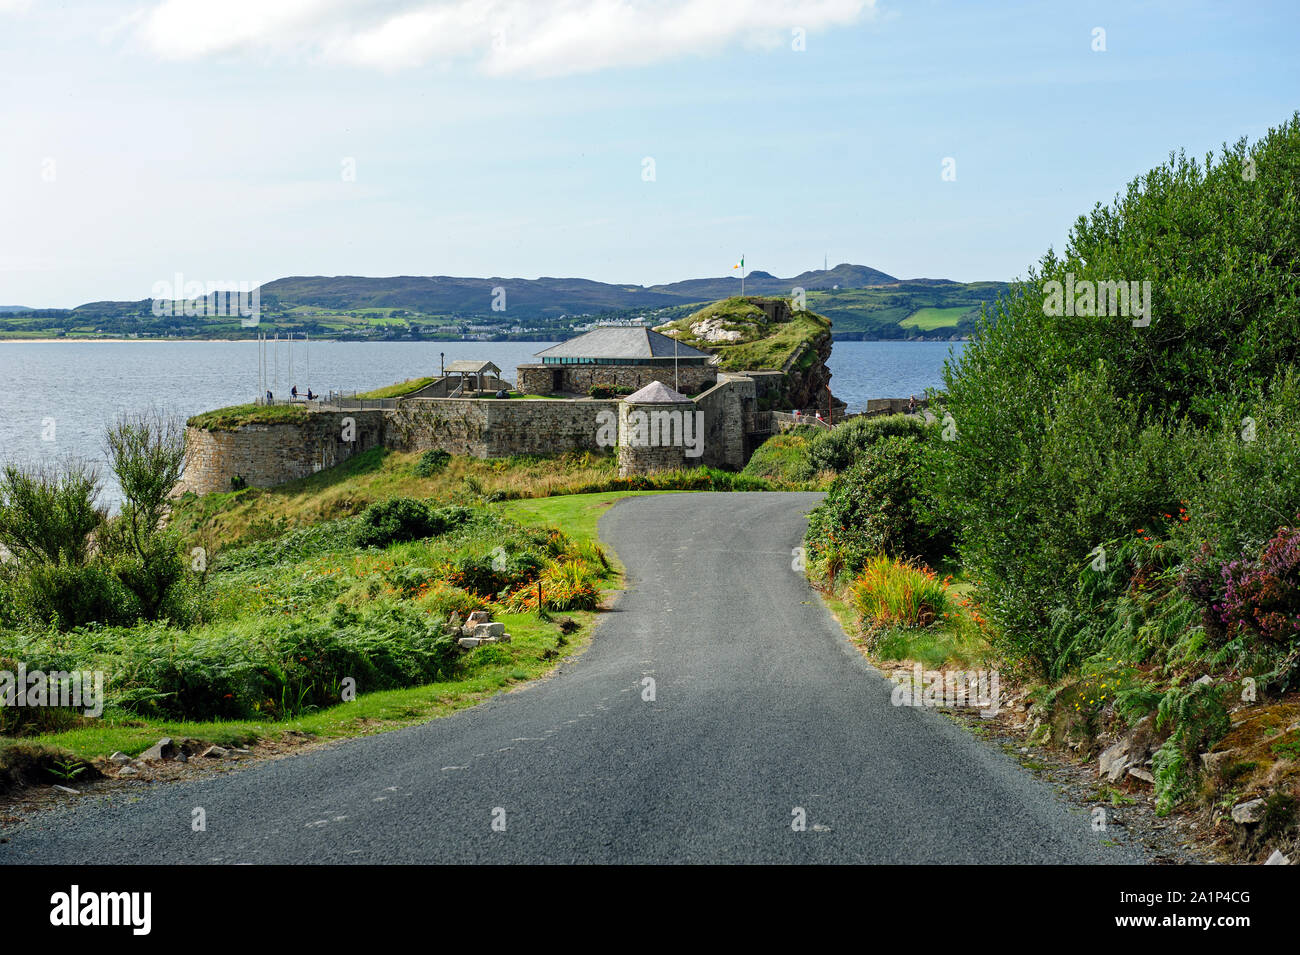 Fort Dunree Millitary Museum de Co, Donegal, Irlande Banque D'Images